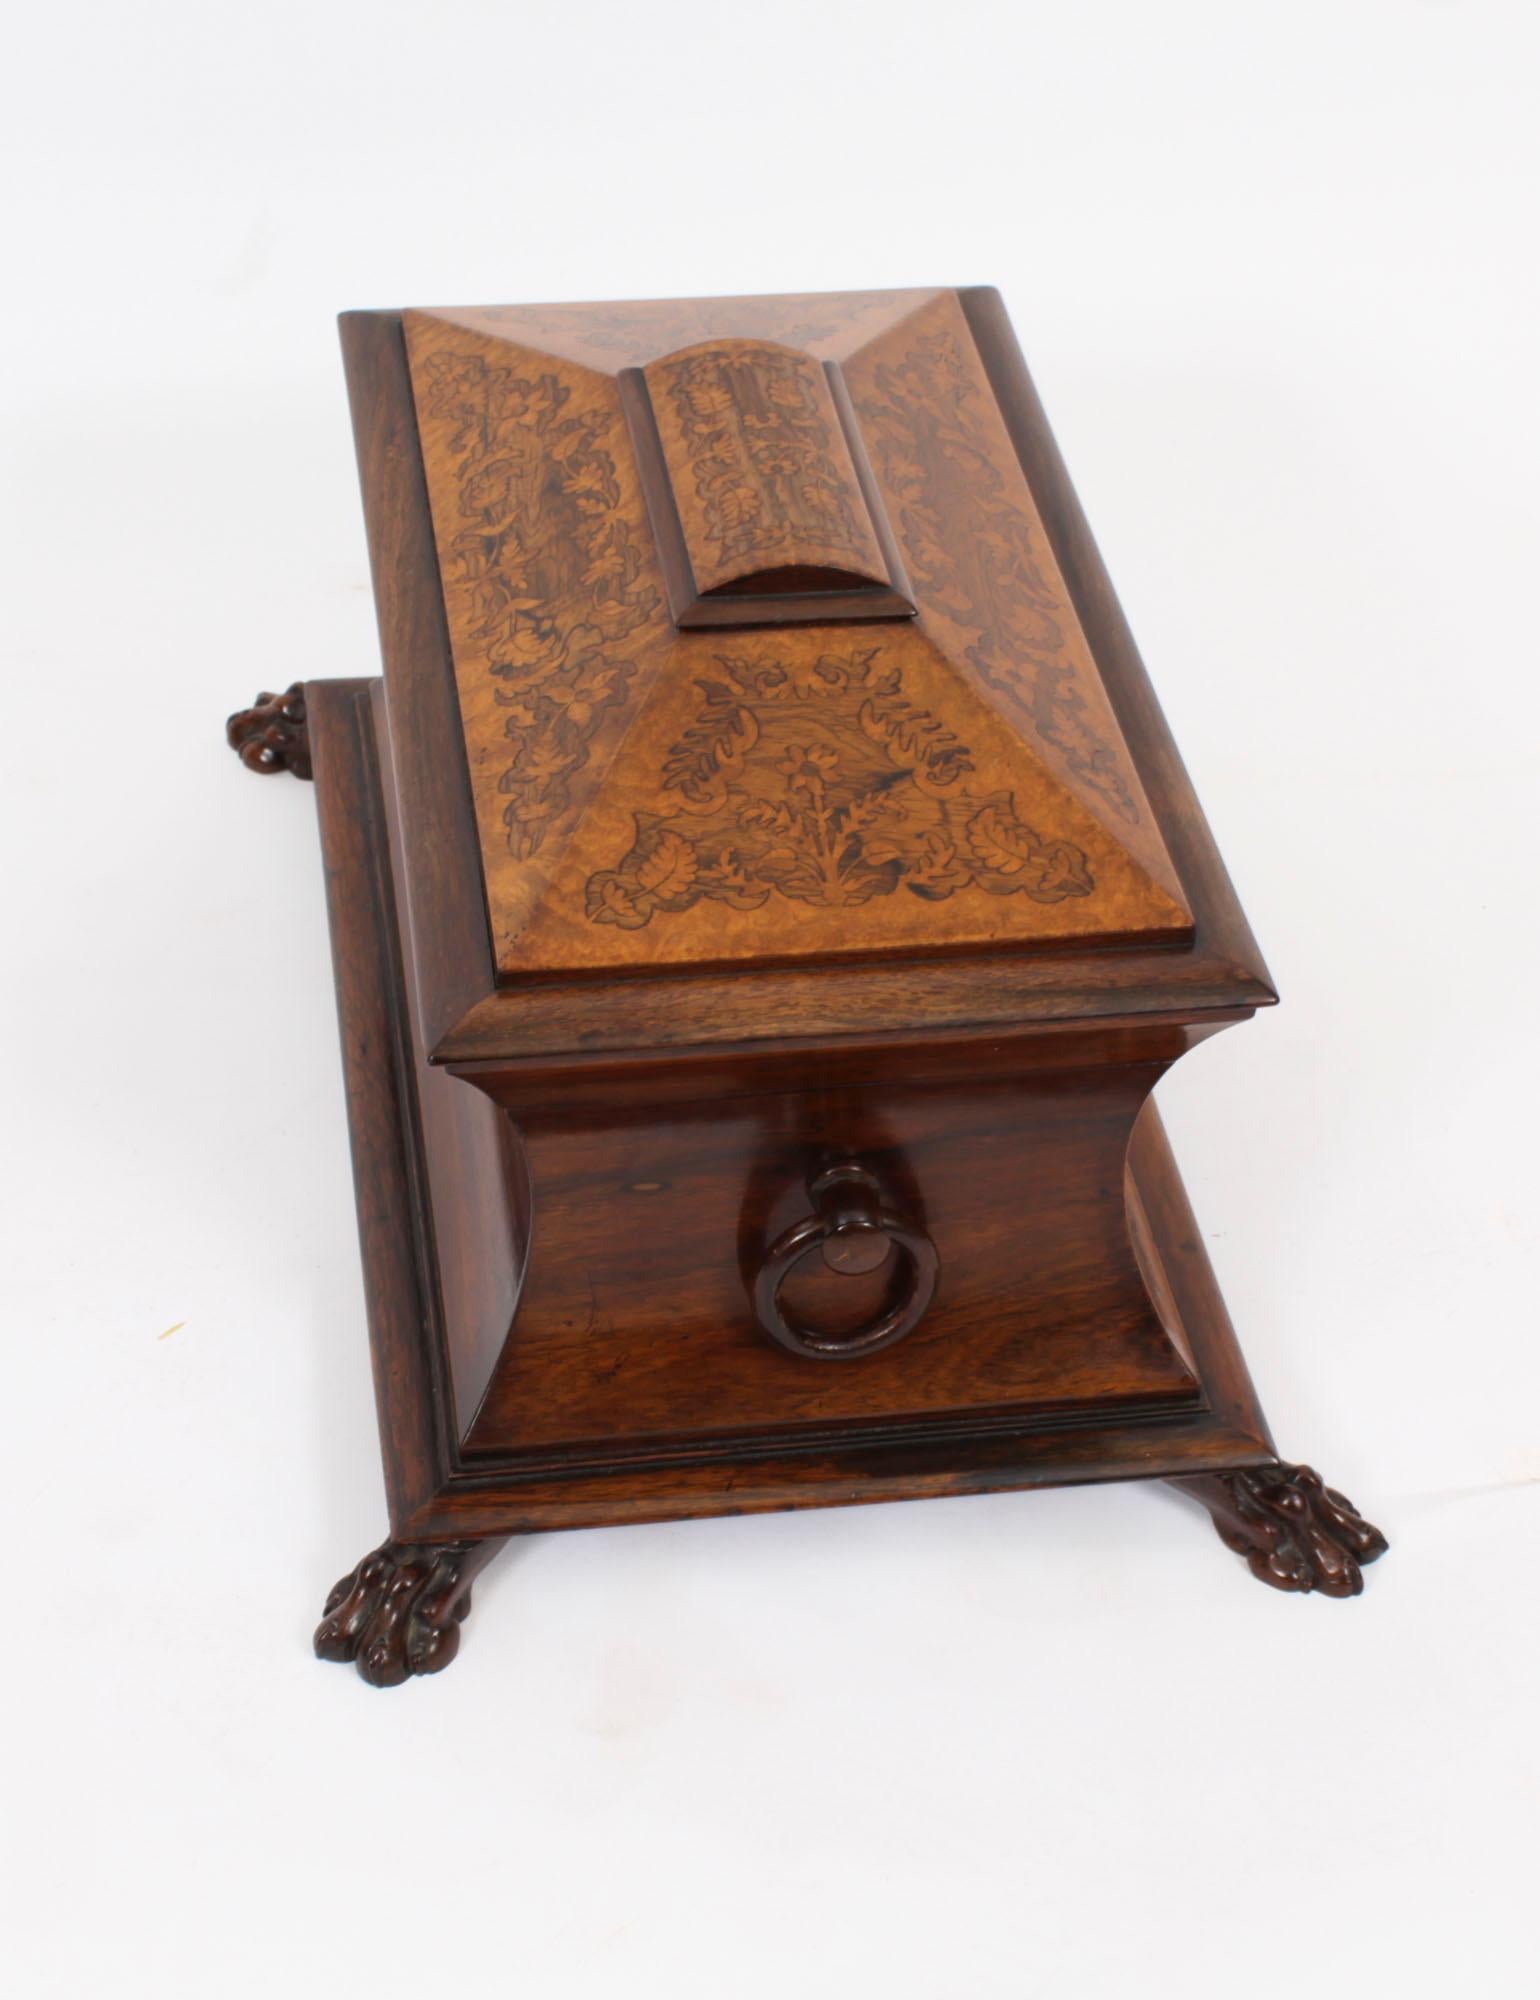 Antique George IV Gonçalo Alves & Amboyna Marquetry Tea Caddy C1825 19th Century For Sale 4